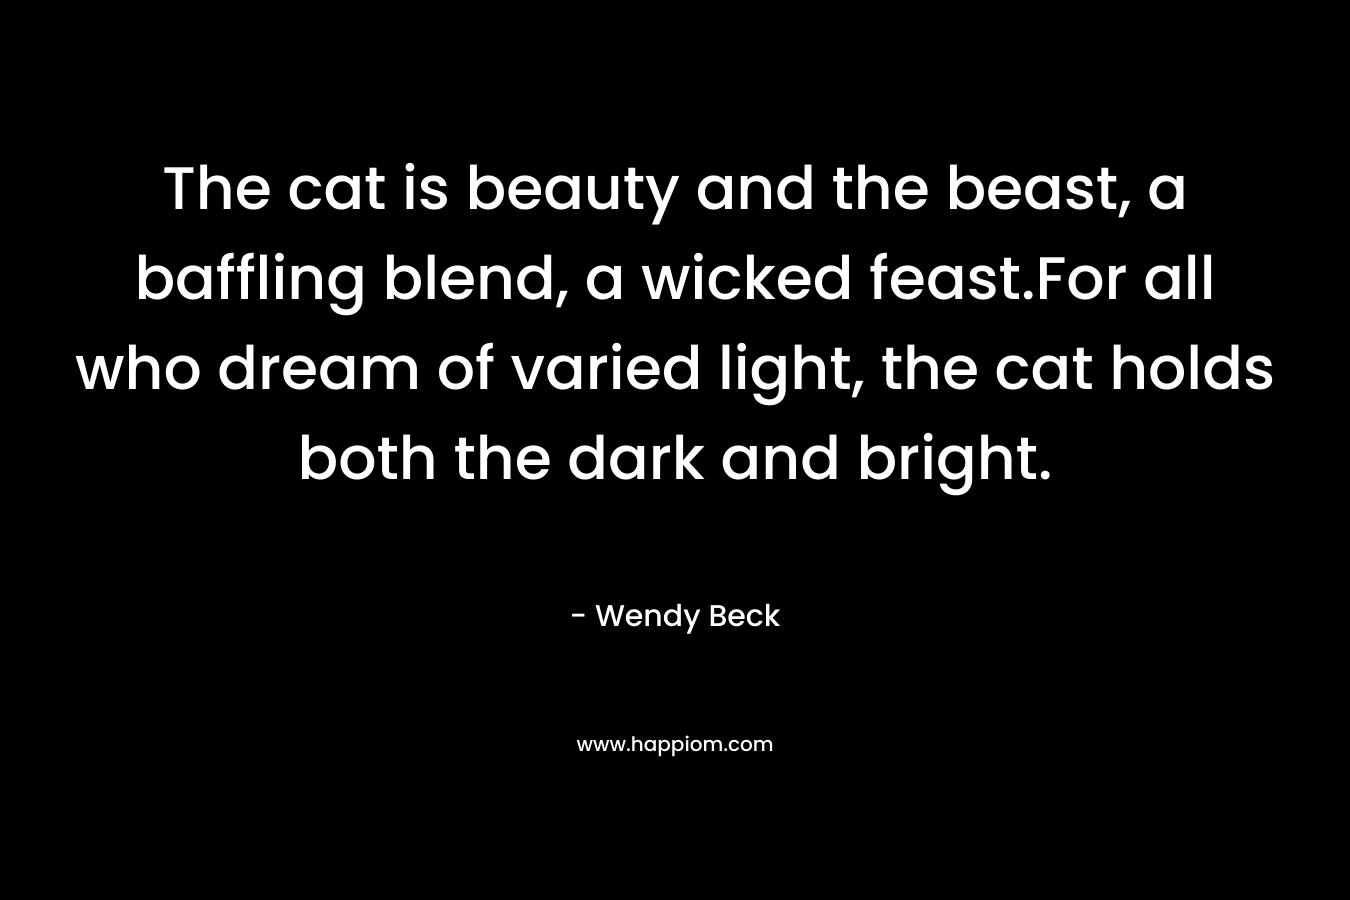 The cat is beauty and the beast, a baffling blend, a wicked feast.For all who dream of varied light, the cat holds both the dark and bright.